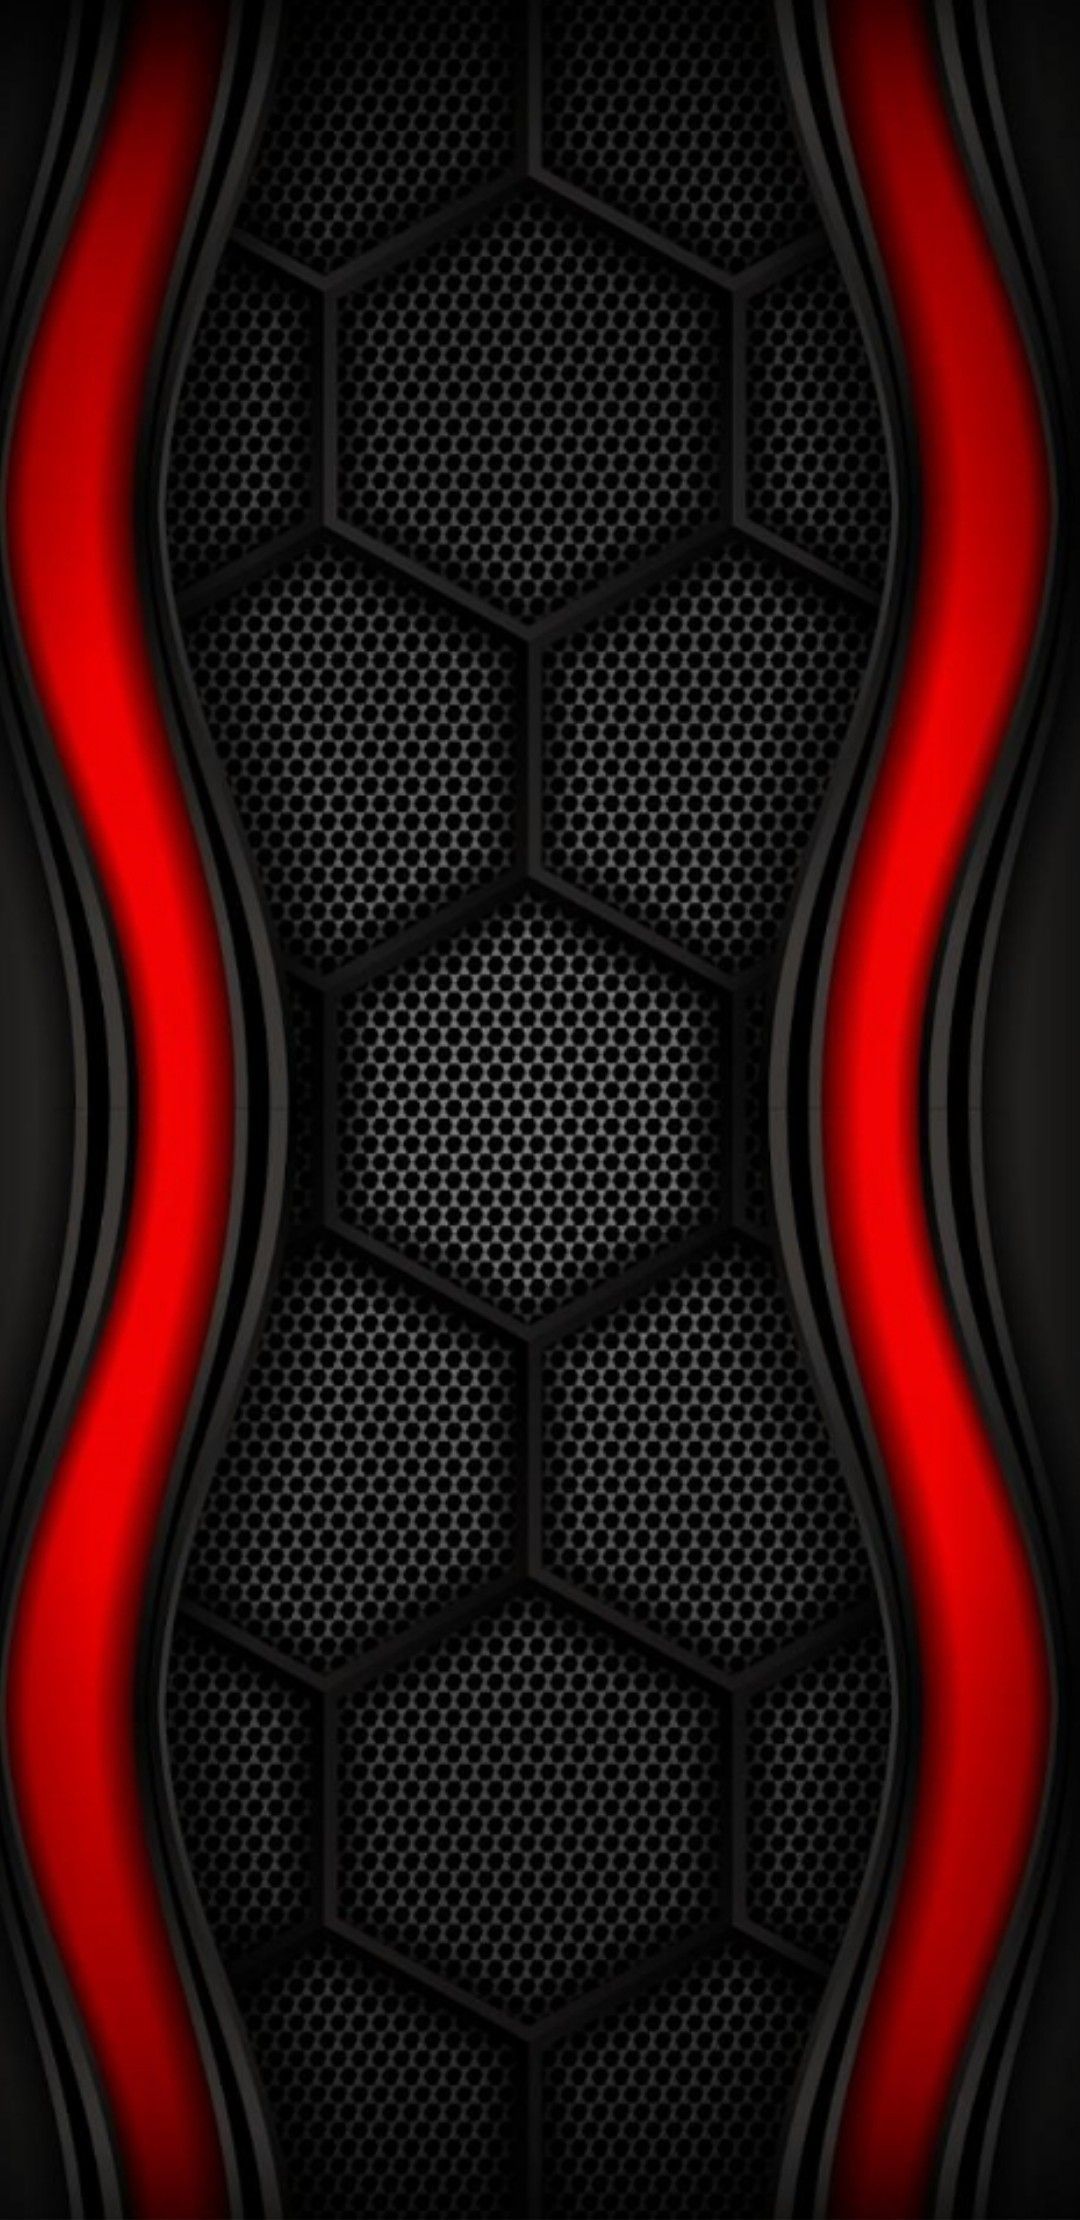 Shoe tread speaker cover. Red and black wallpaper, Android